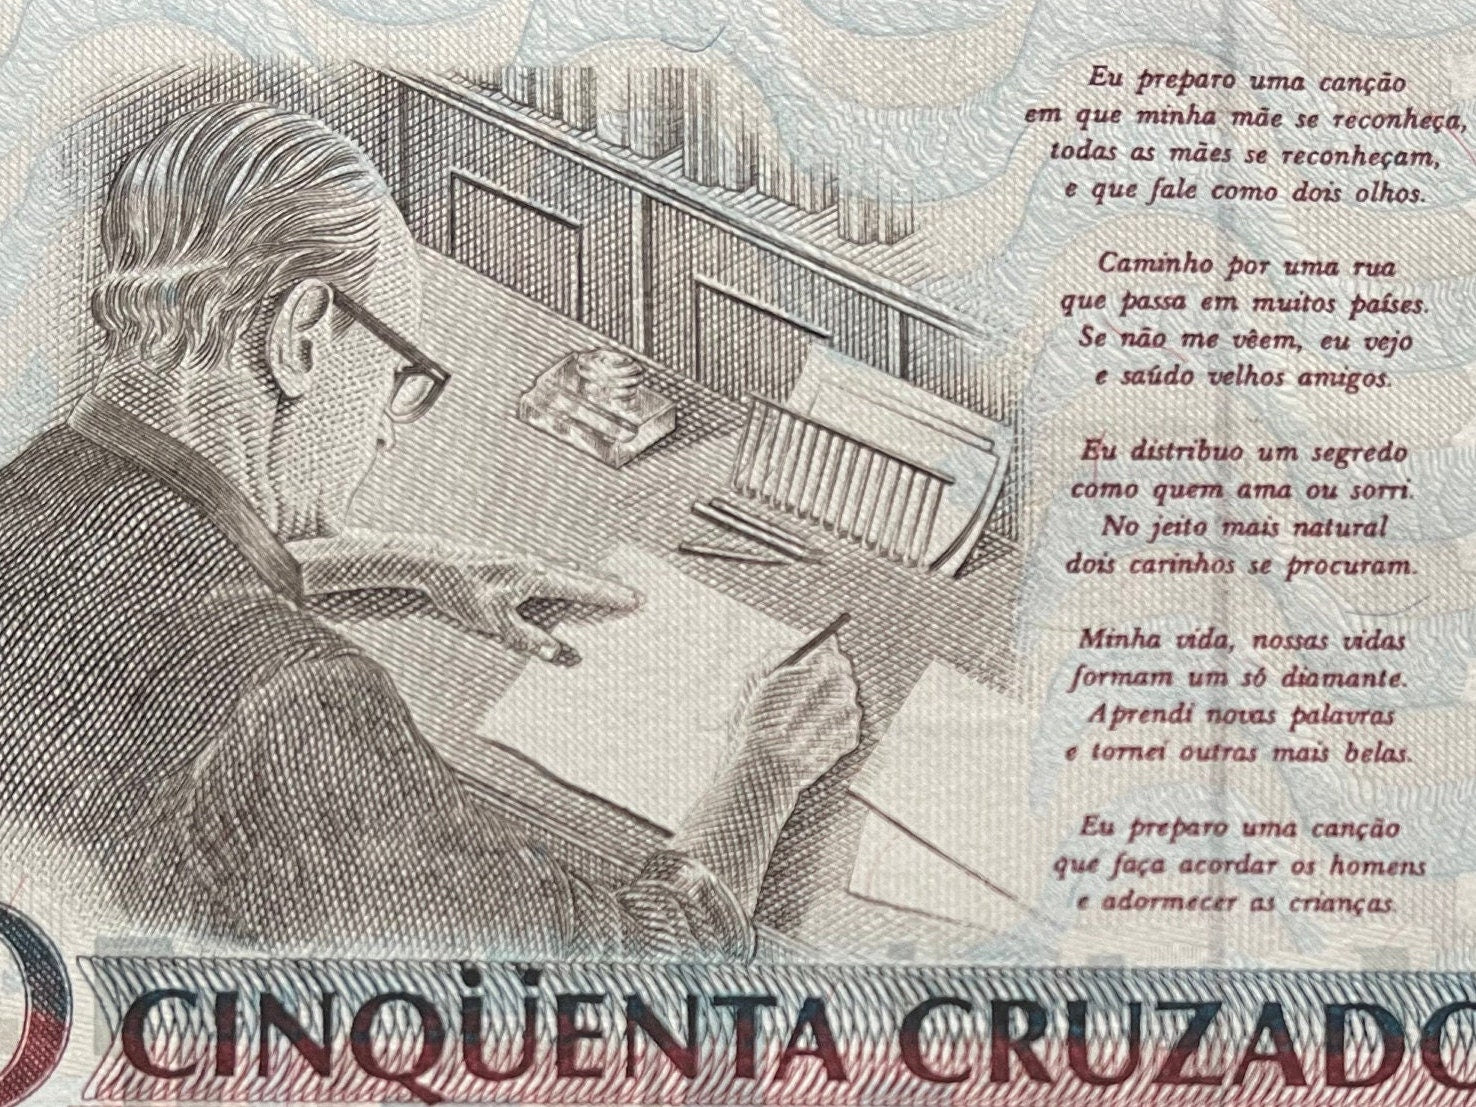 Poet Carlos Drummond de Andrade 50 Cruzieros Brazil Authentic Banknote Money for Jewelry and Craft Making (Writing Desk) (Poetry) (1990)